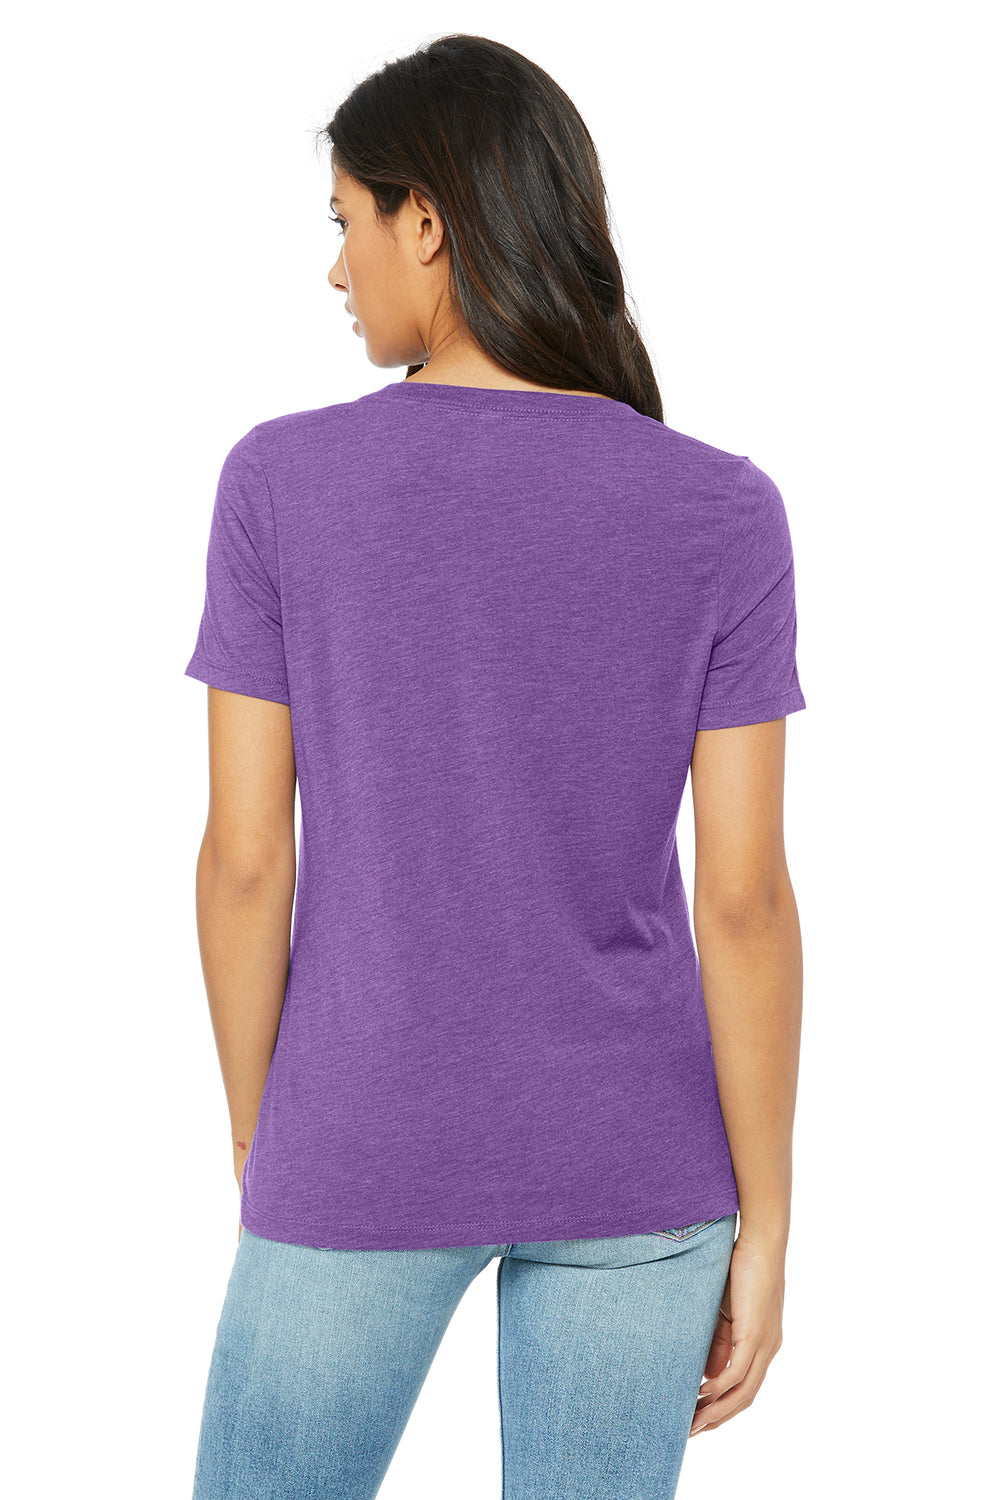 Bella + Canvas BC6405/6405 Womens Relaxed Jersey Short Sleeve V-Neck T-Shirt Purple Triblend Model Back